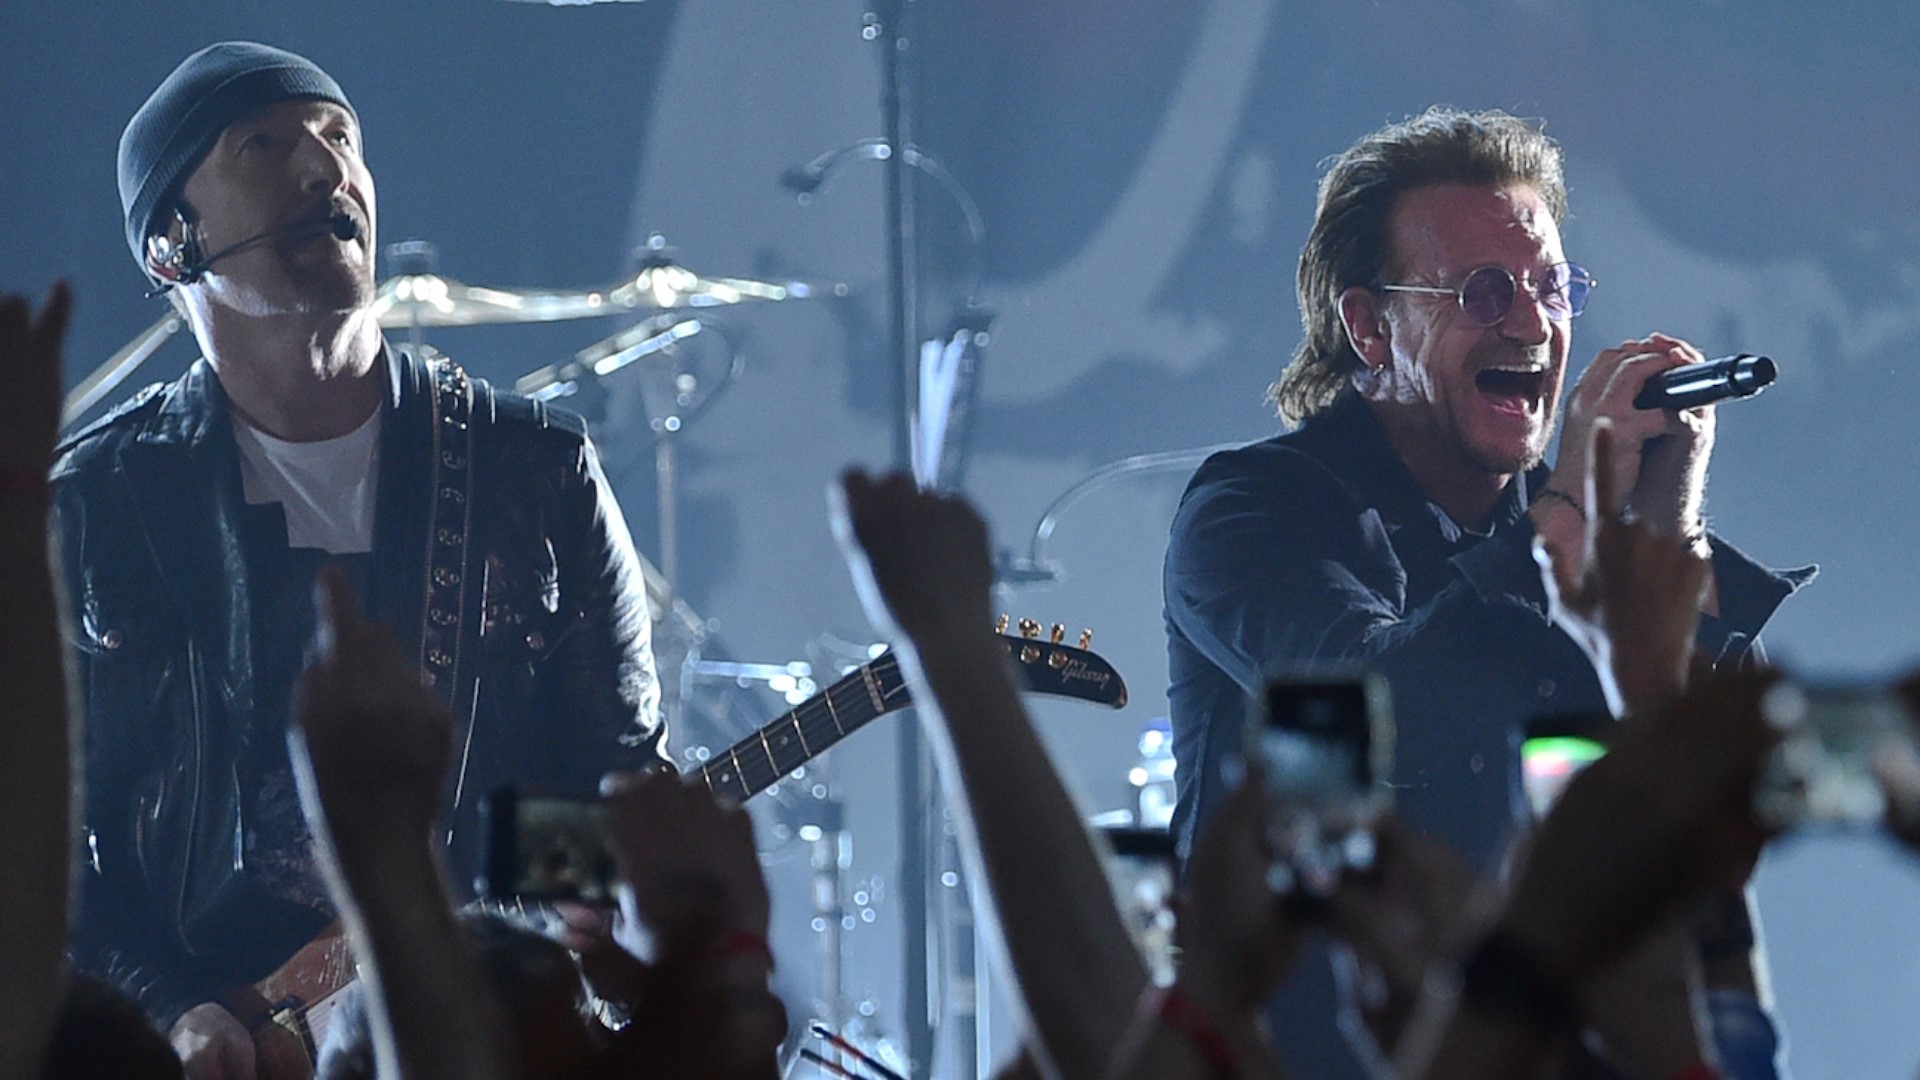 WATCH: U2 concert tribute to Israel music festival victims